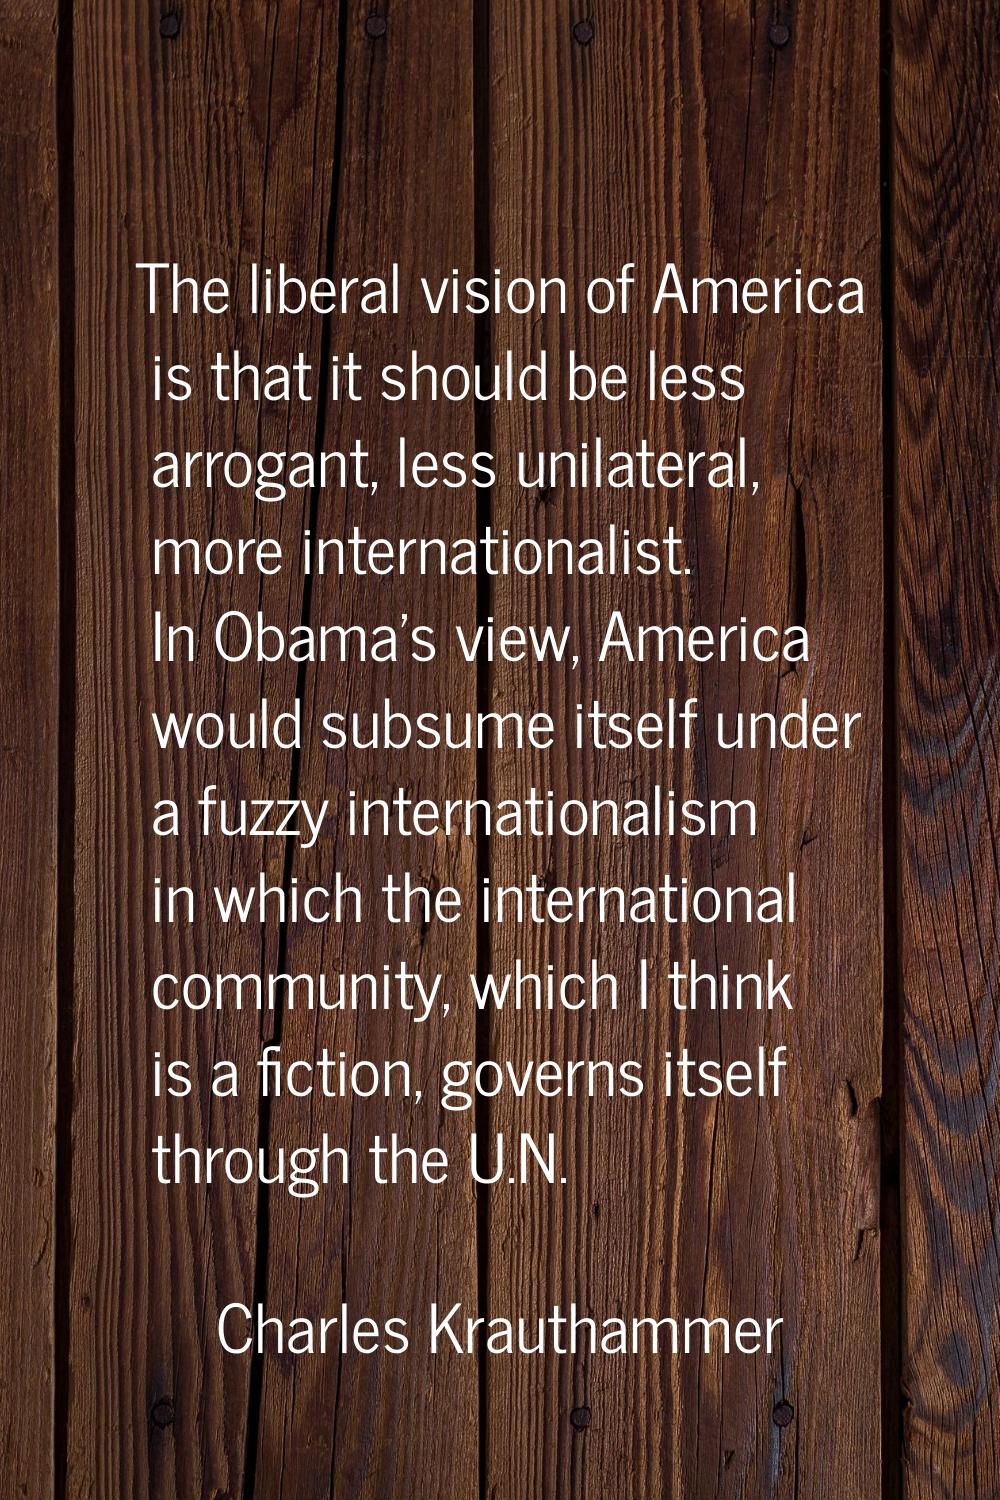 The liberal vision of America is that it should be less arrogant, less unilateral, more internation